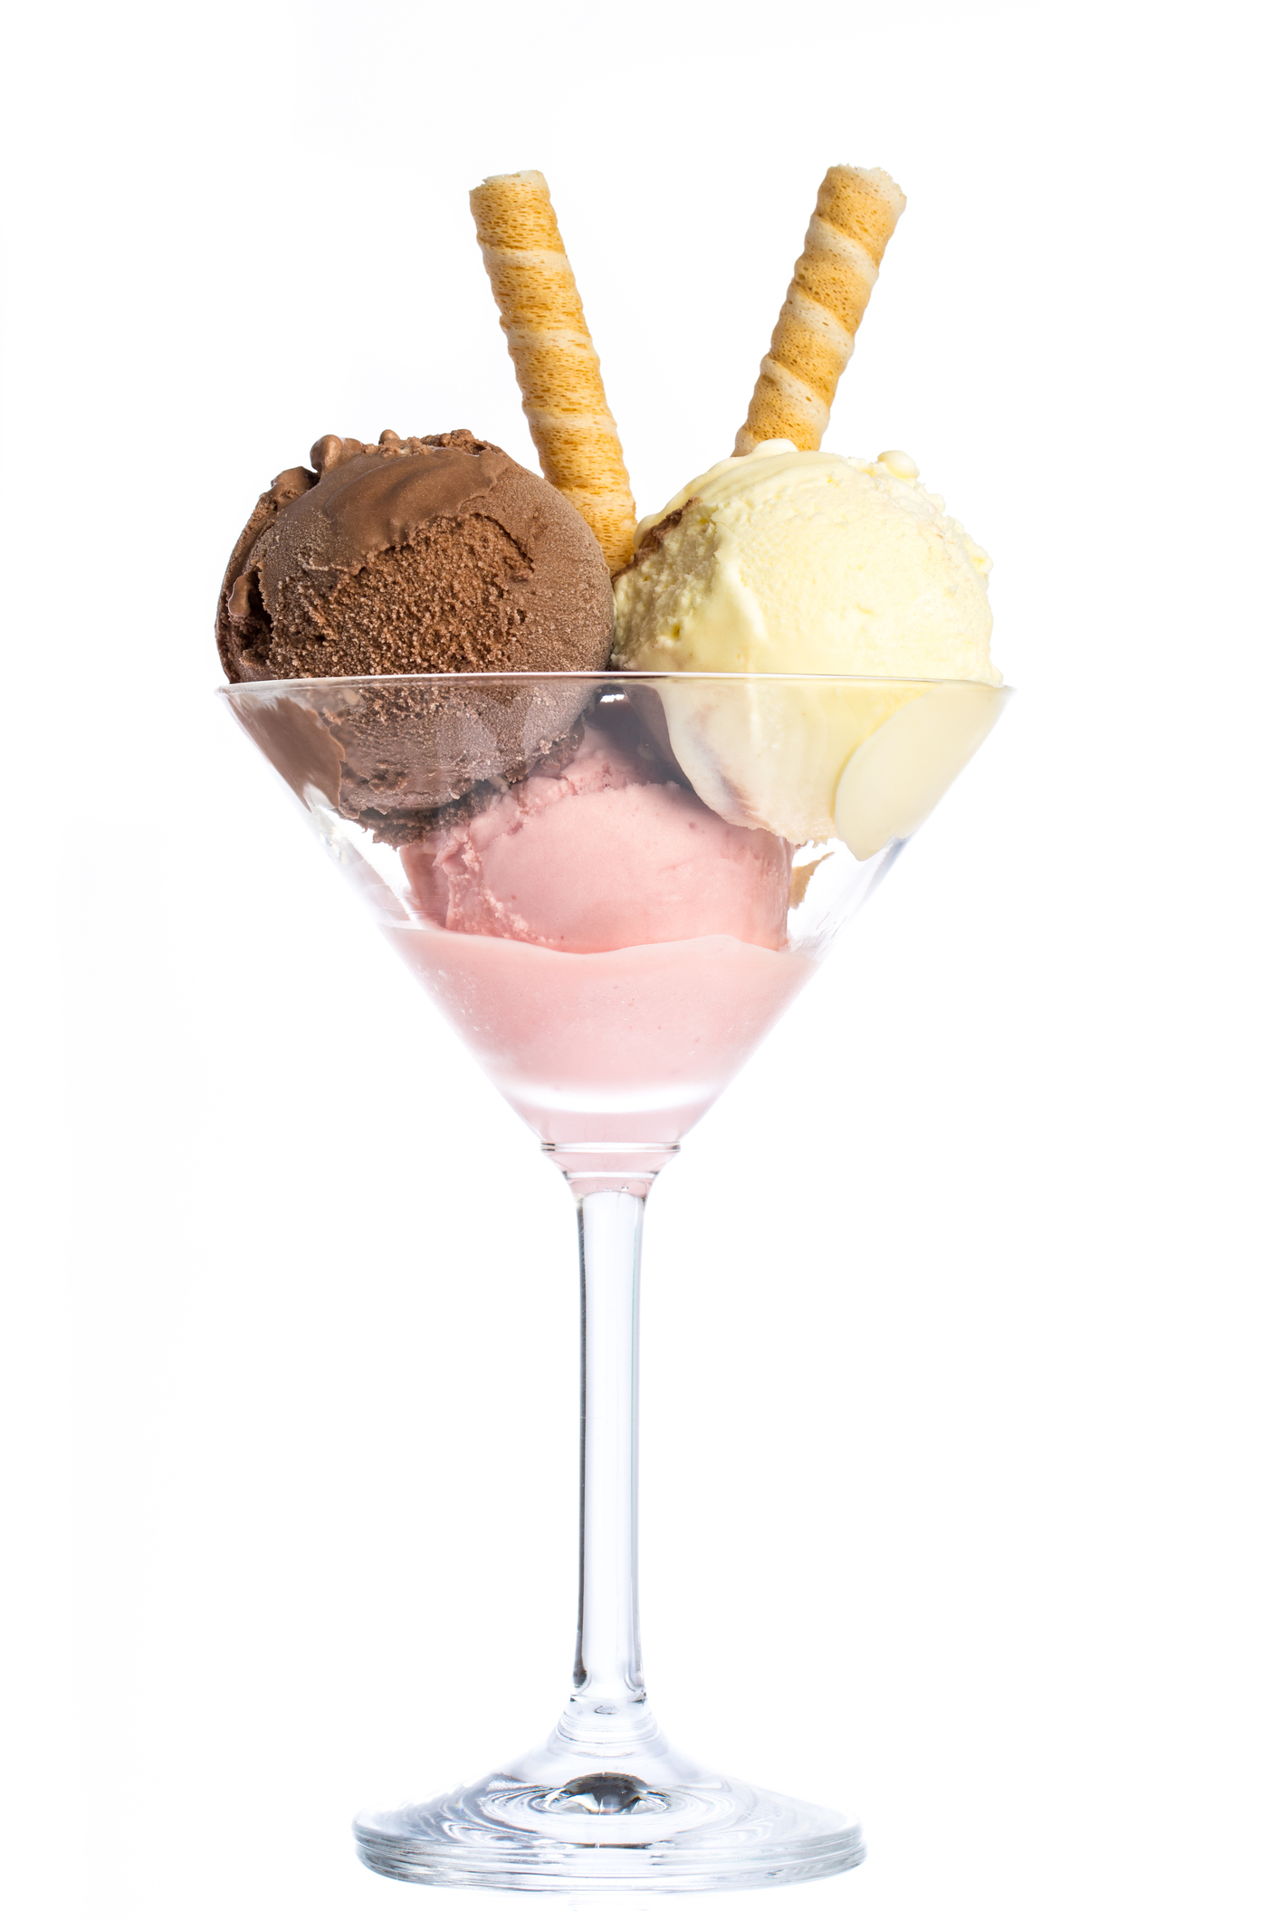 Who Invented Ice Cream? The One Question in All Our Minds